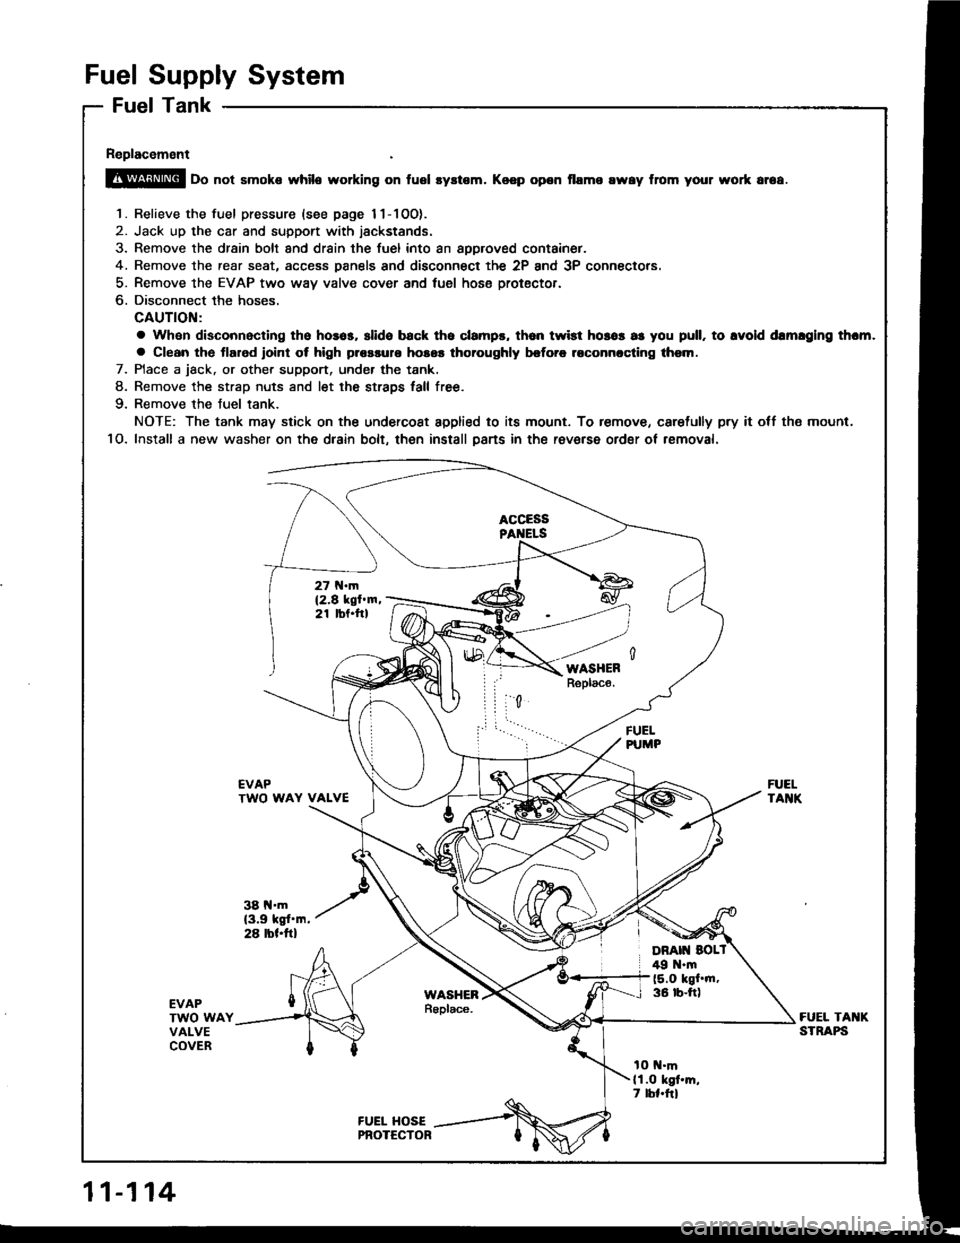 HONDA INTEGRA 1994 4.G Workshop Manual Fuel Supply System
Fuel Tank
Replacement
@ oo not smoke while working on fusl syltem. Koep opon flame rway from your wort ar6a.
1. Relieve the fuel pressure {see page 11-1OO).
2. Jack up the car and s